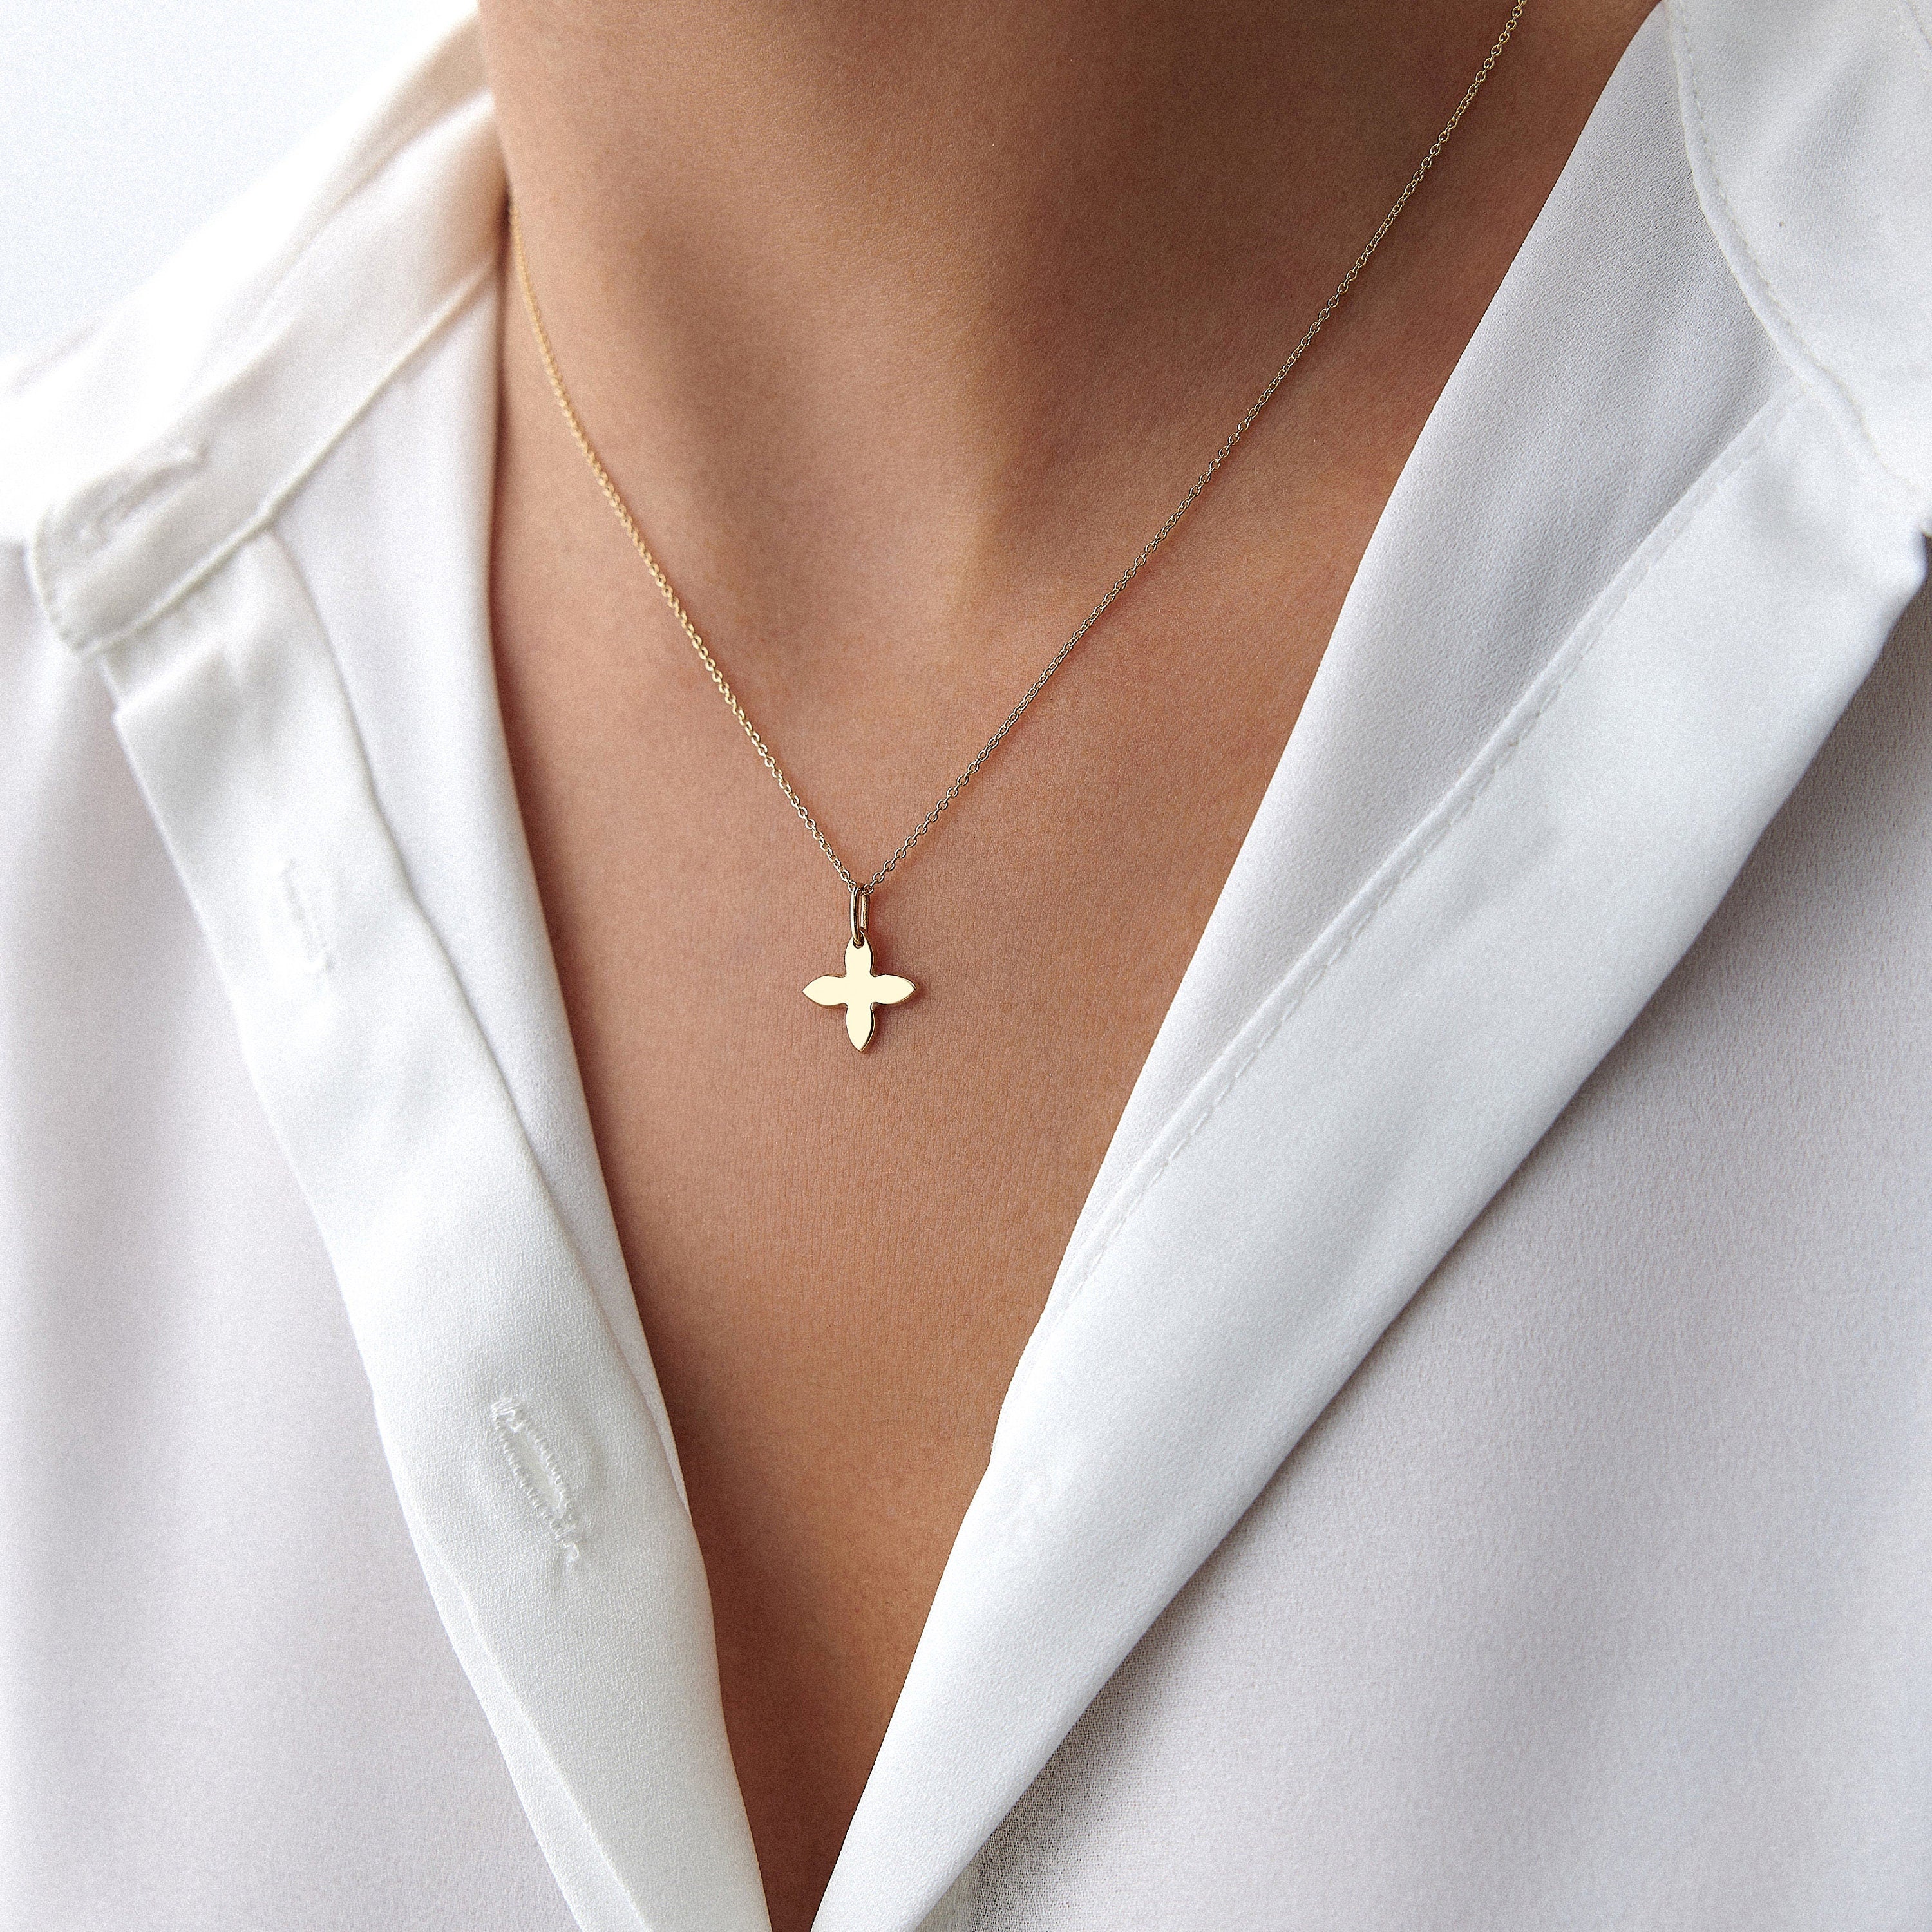 Clover Pendant Necklace Available in 14K and 18K Gold